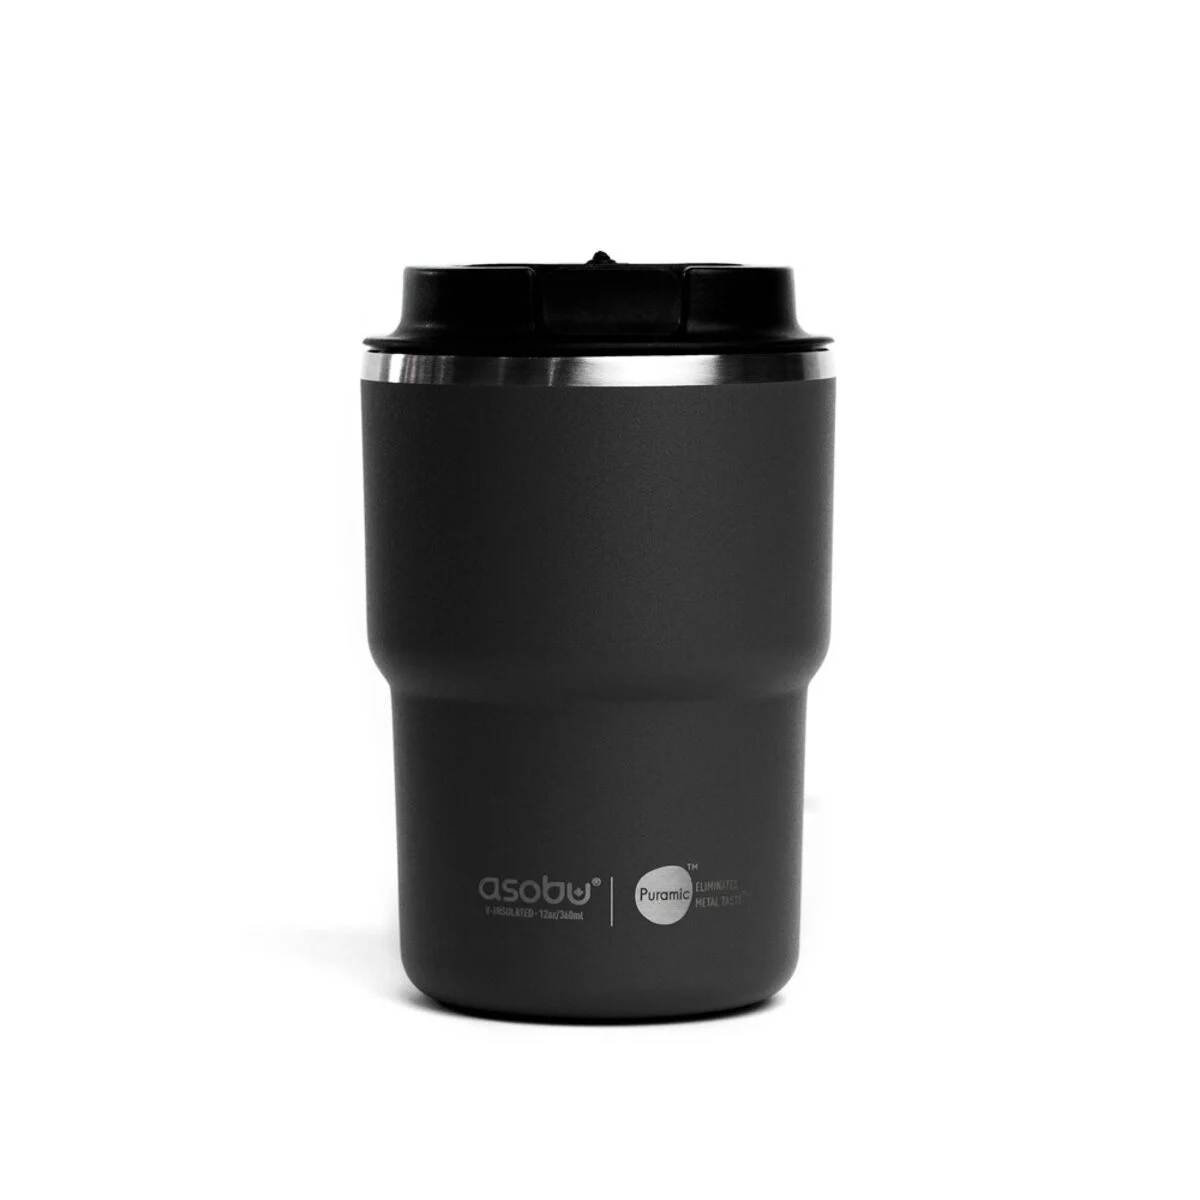 Asobu Stainless Steel Double Insulated Mini Pick-Up Mug/Cup 355ML (Puramic Series Available)